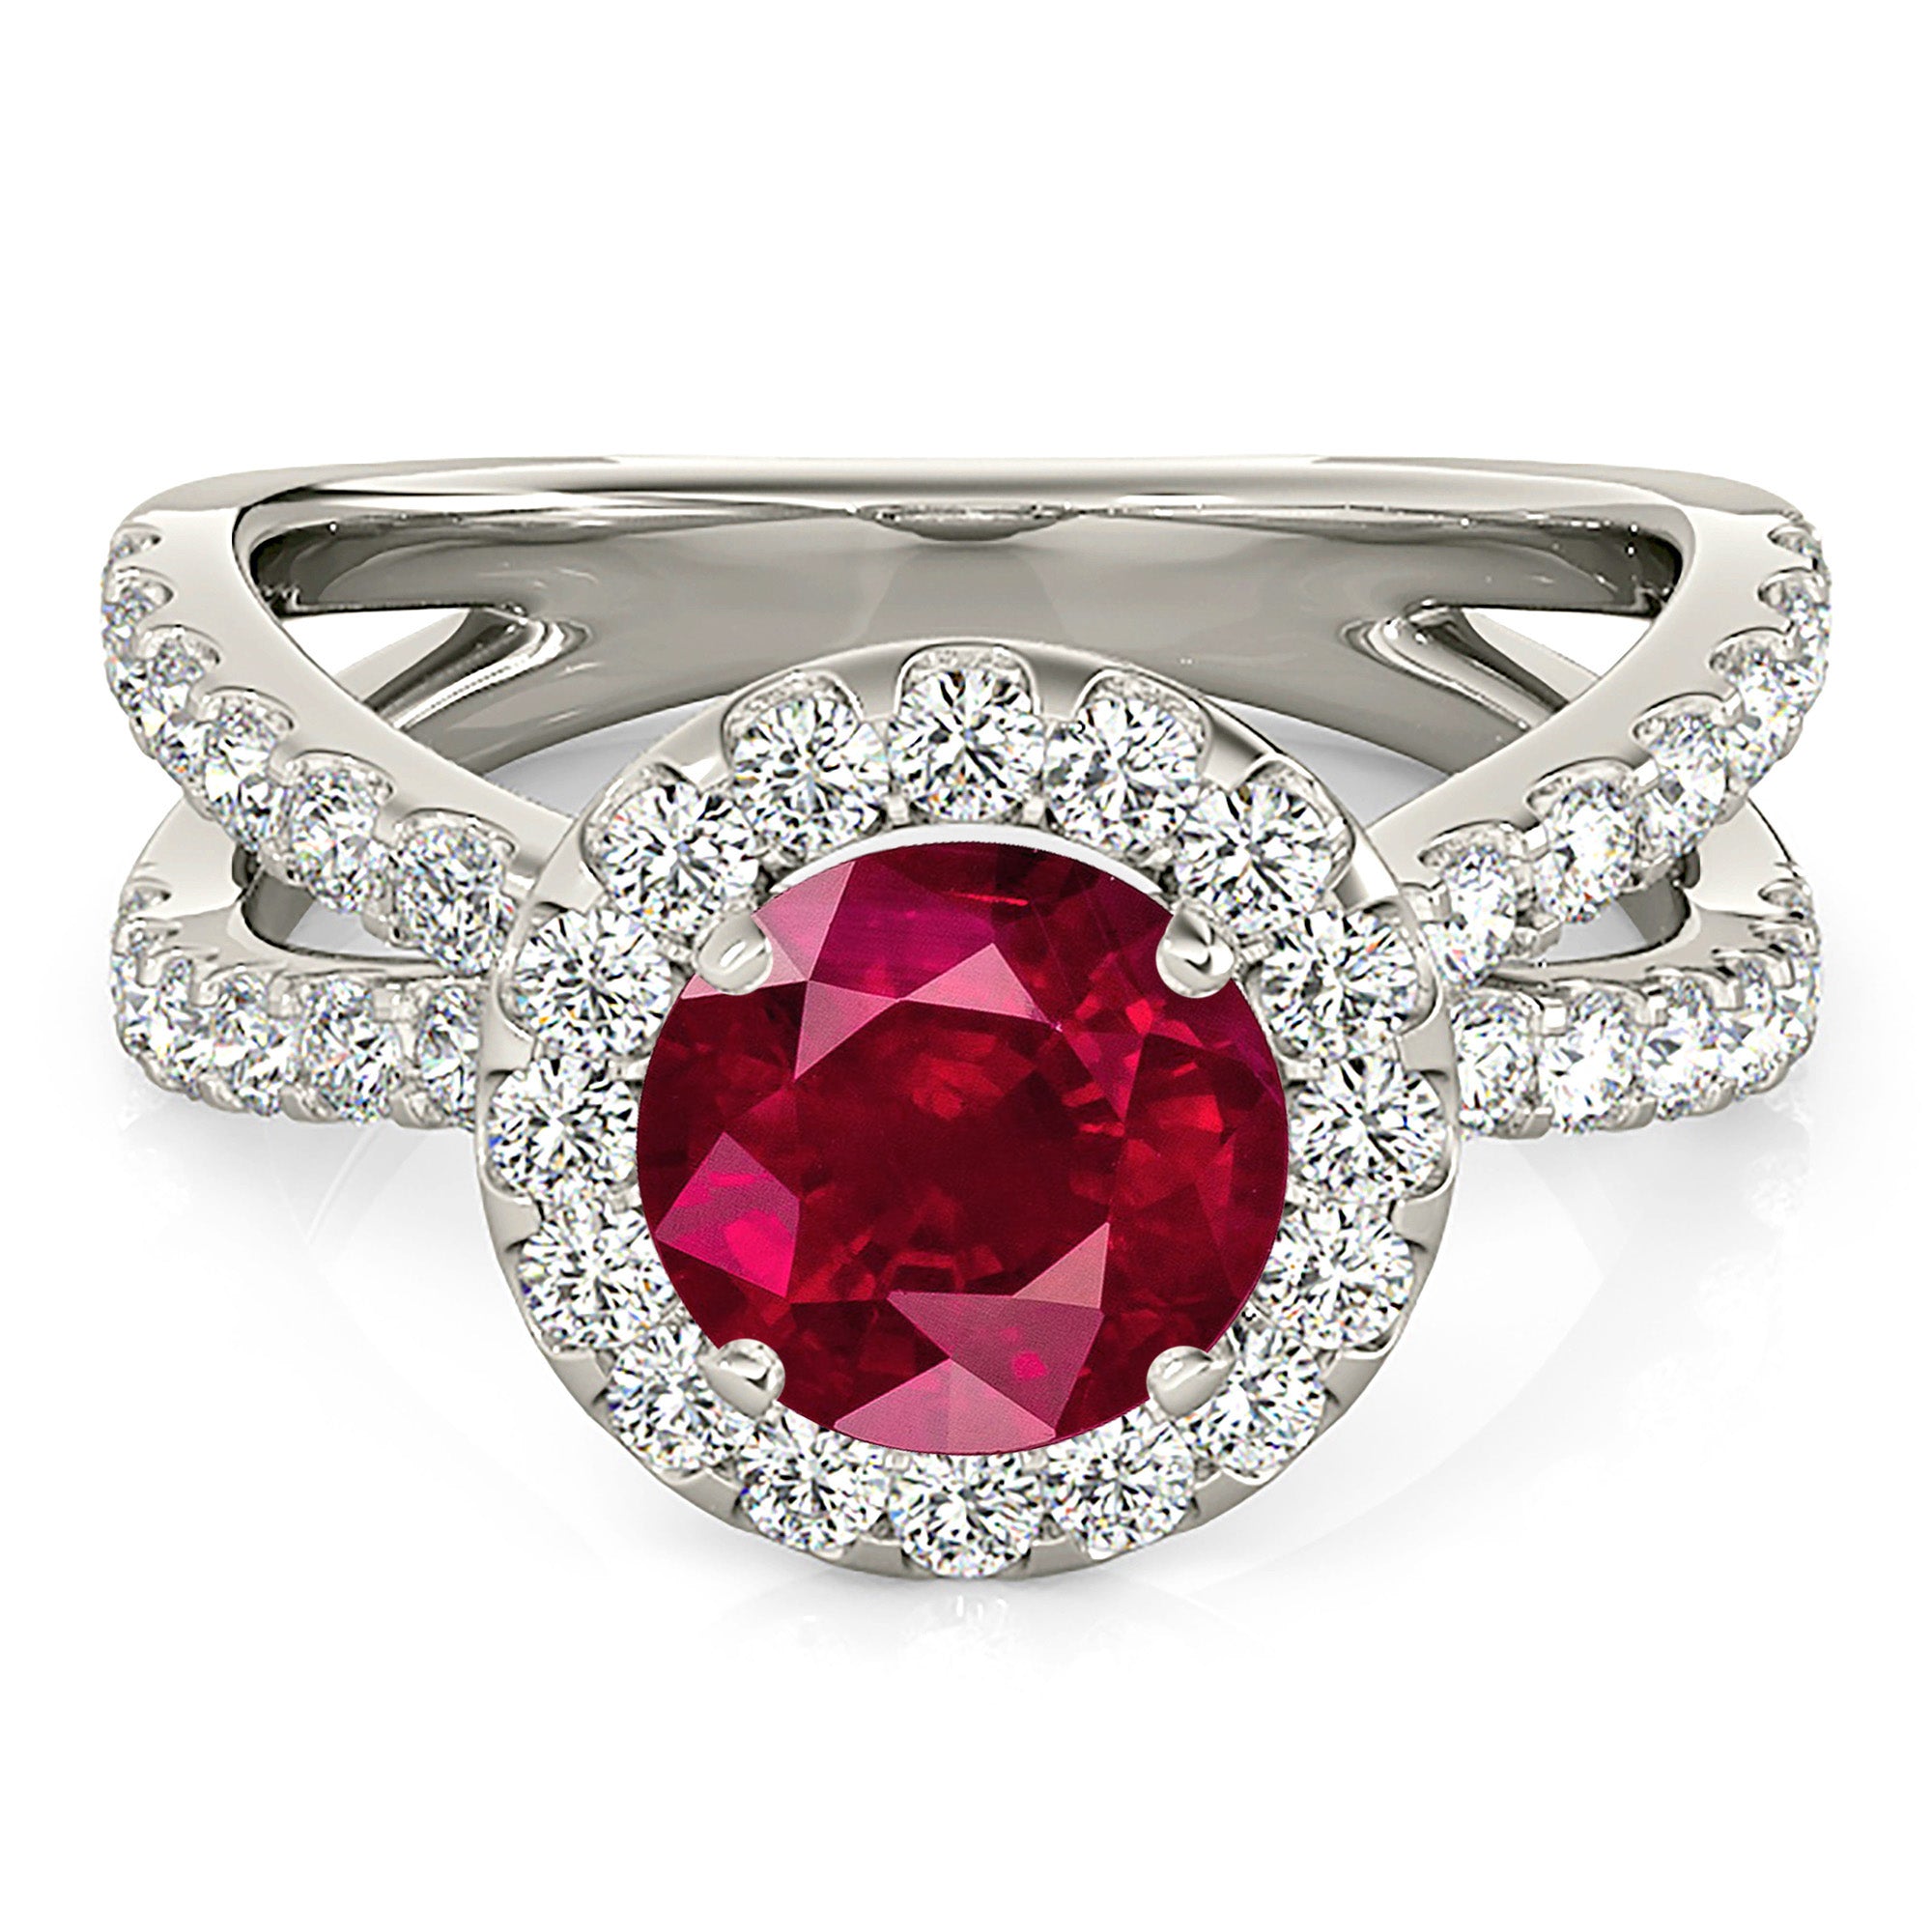 1.79 ct. Genuine Ruby Ring With 0.90 ctw. Diamond Halo And Open Split Diamond Shank-in 14K/18K White, Yellow, Rose Gold and Platinum - Christmas Jewelry Gift -VIRABYANI